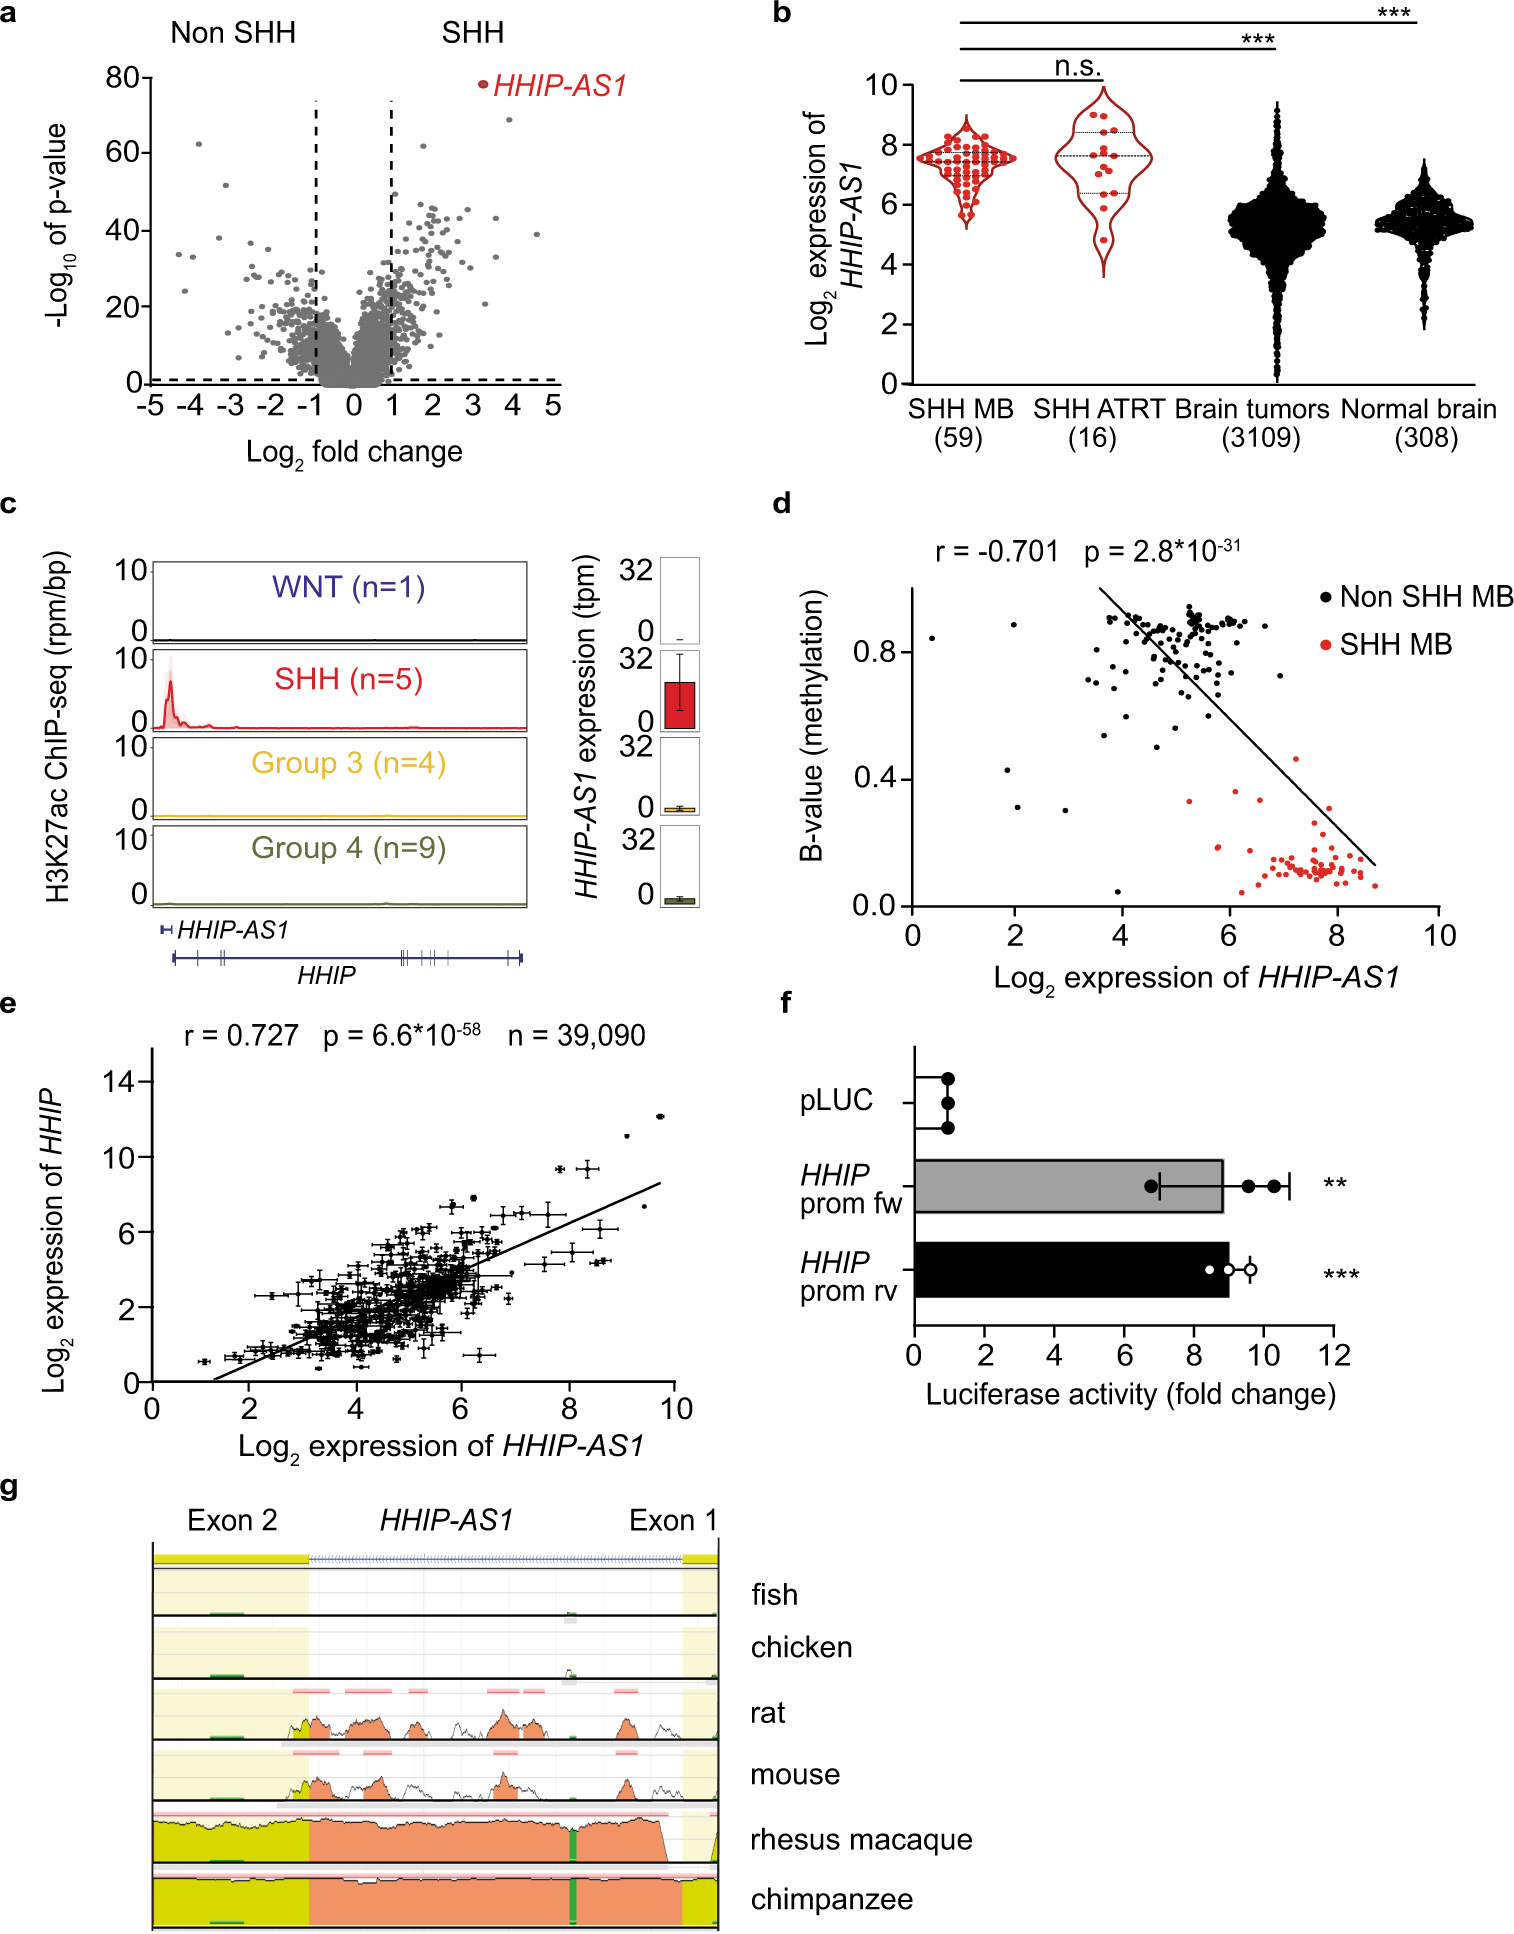 The HHIP-AS1 lncRNA promotes tumorigenicity through stabilization of dynein  complex 1 in human SHH-driven tumors | Nature Communications